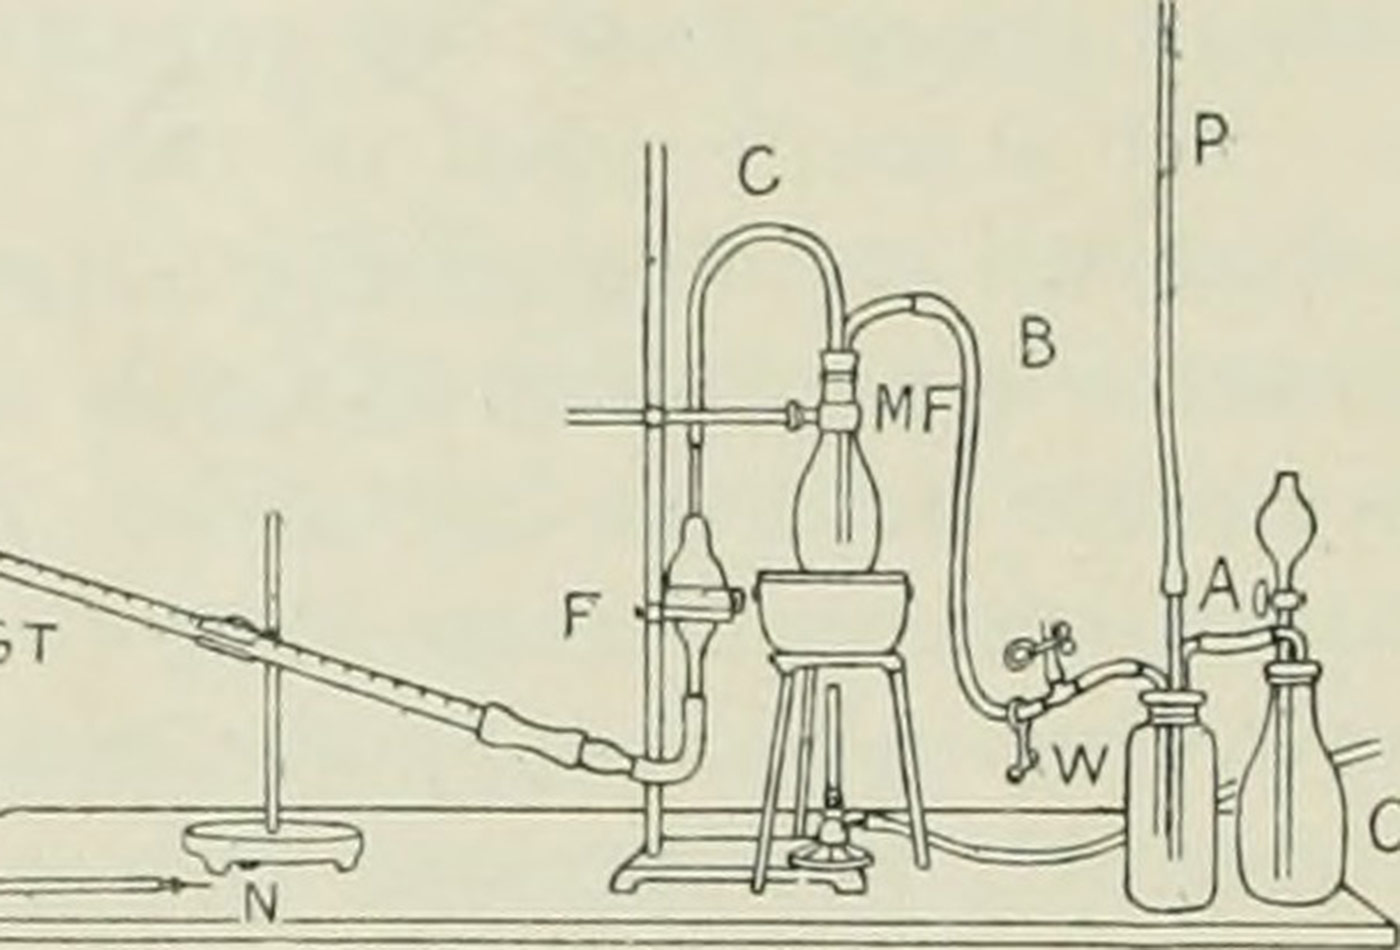 Image from page 361 of "American journal of physiology" (1898).